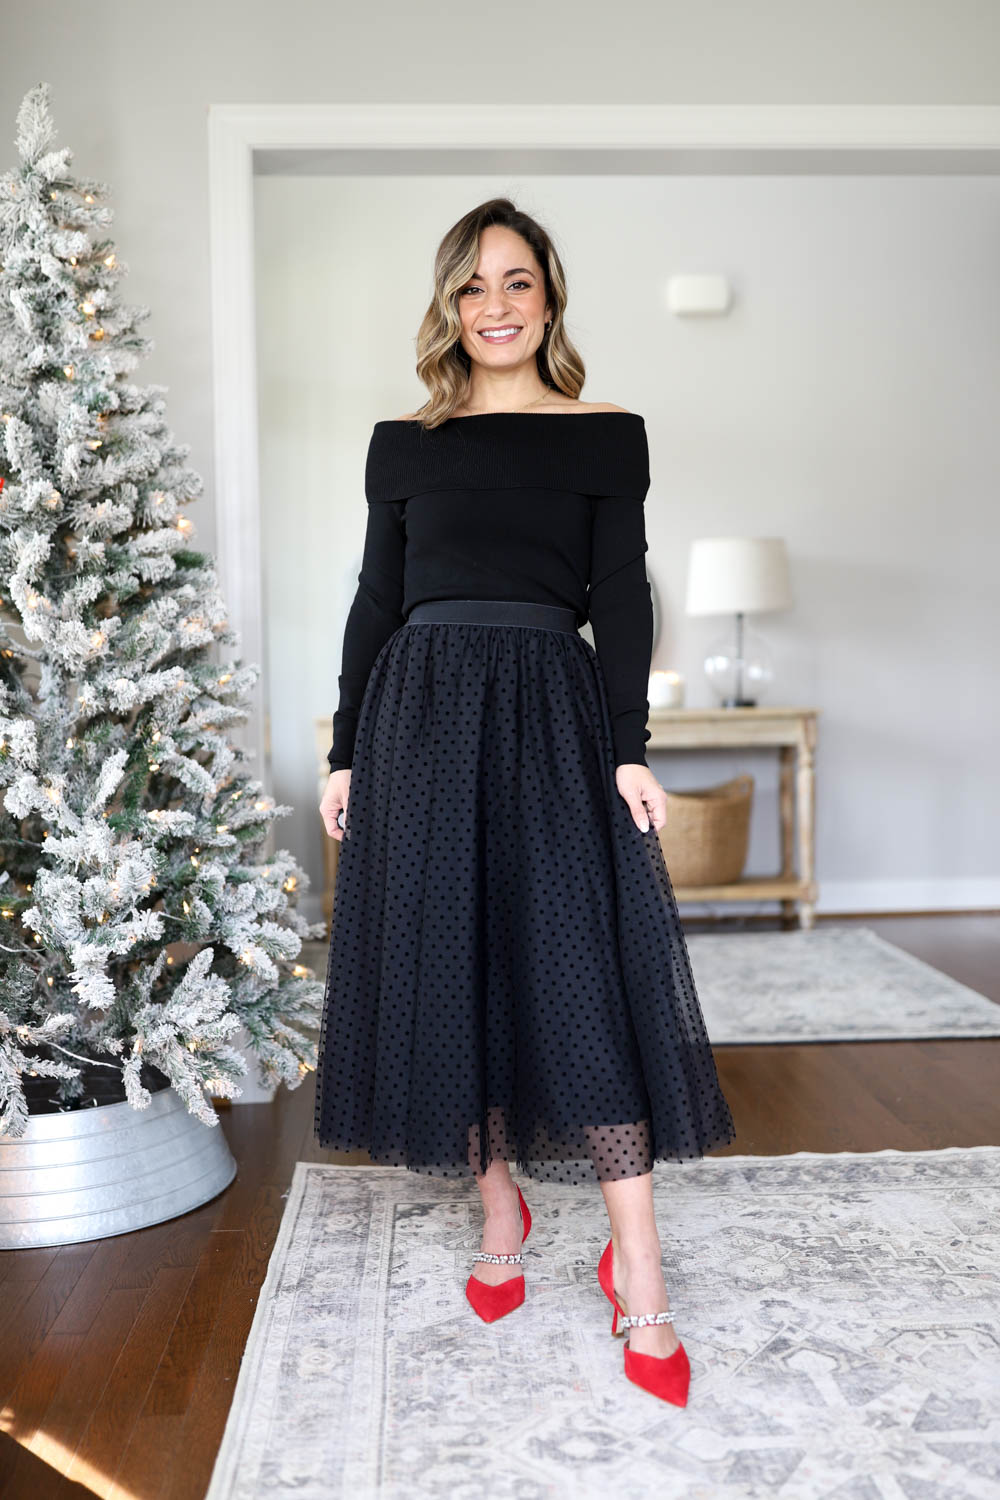 Winter Party Outfit Ideas: What to Wear